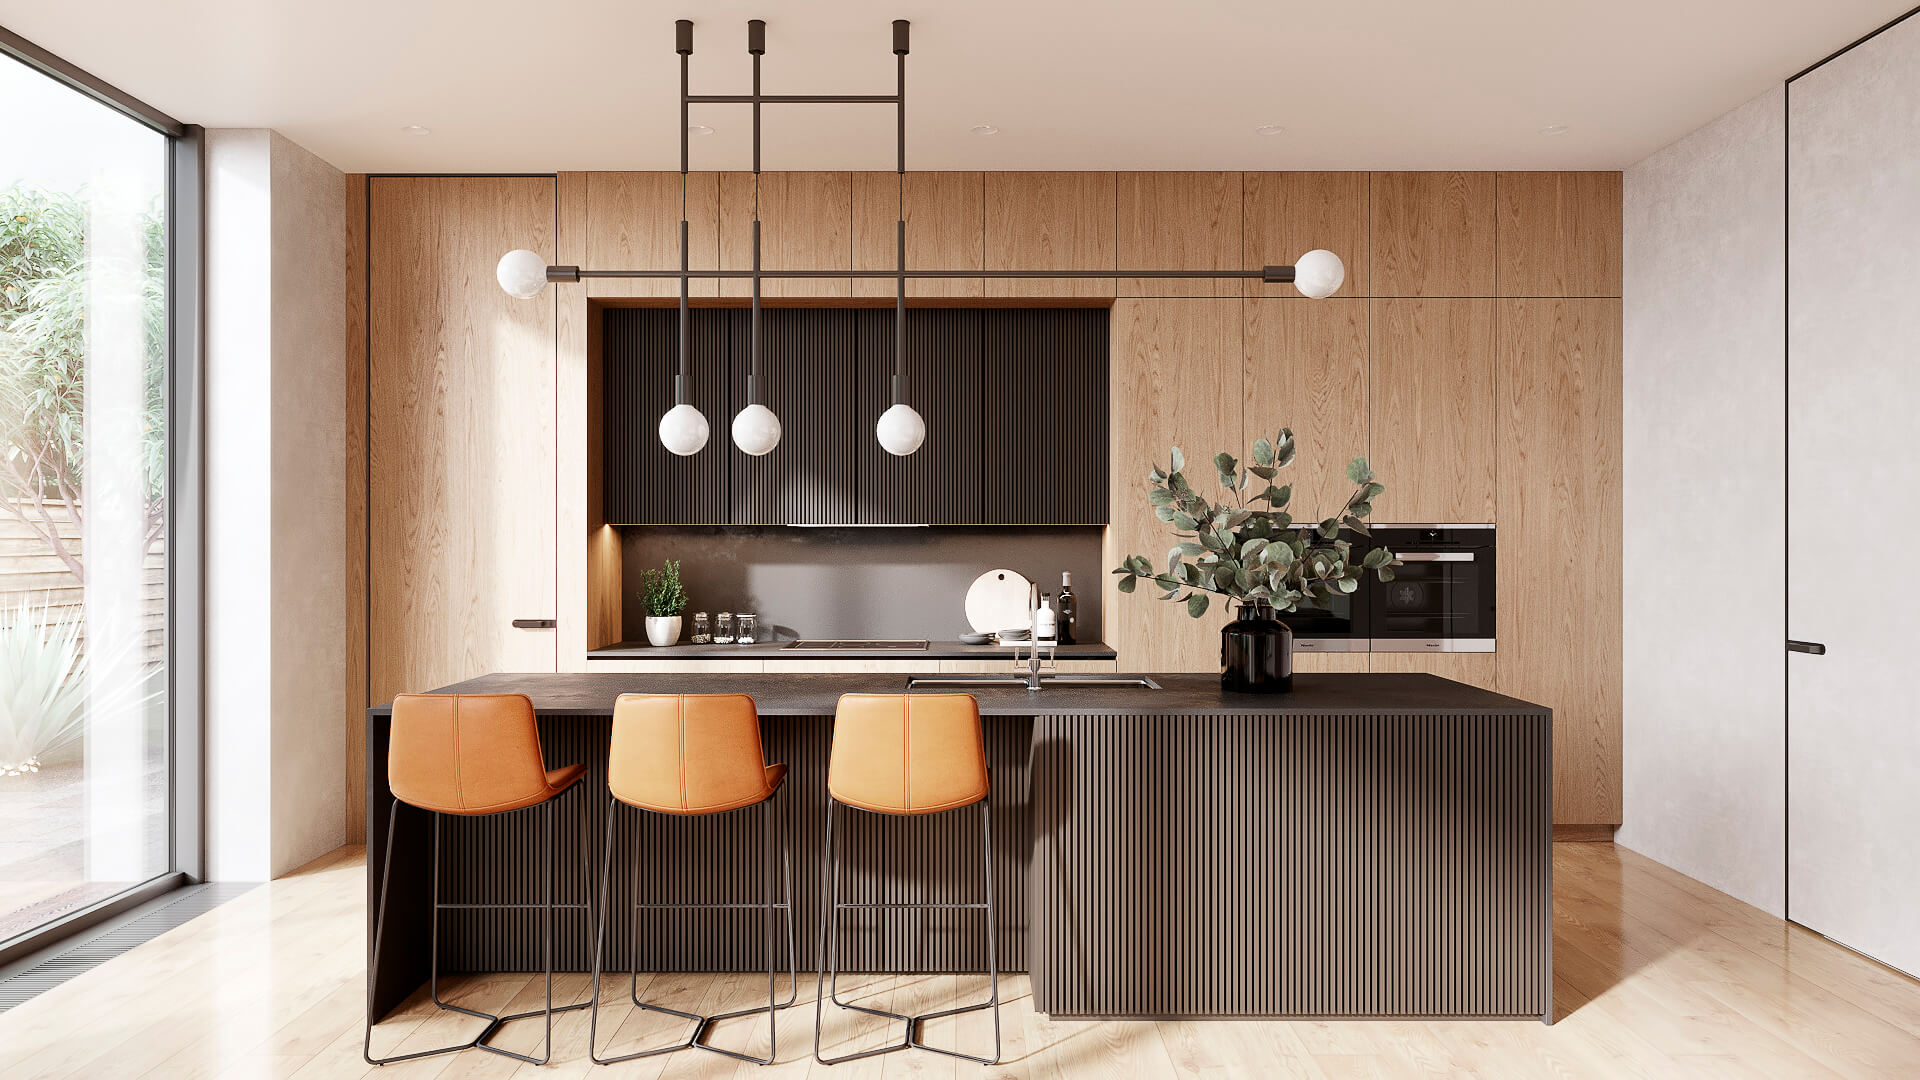 High-Quality 3D Visualization of a Contemporary Kitchen Design